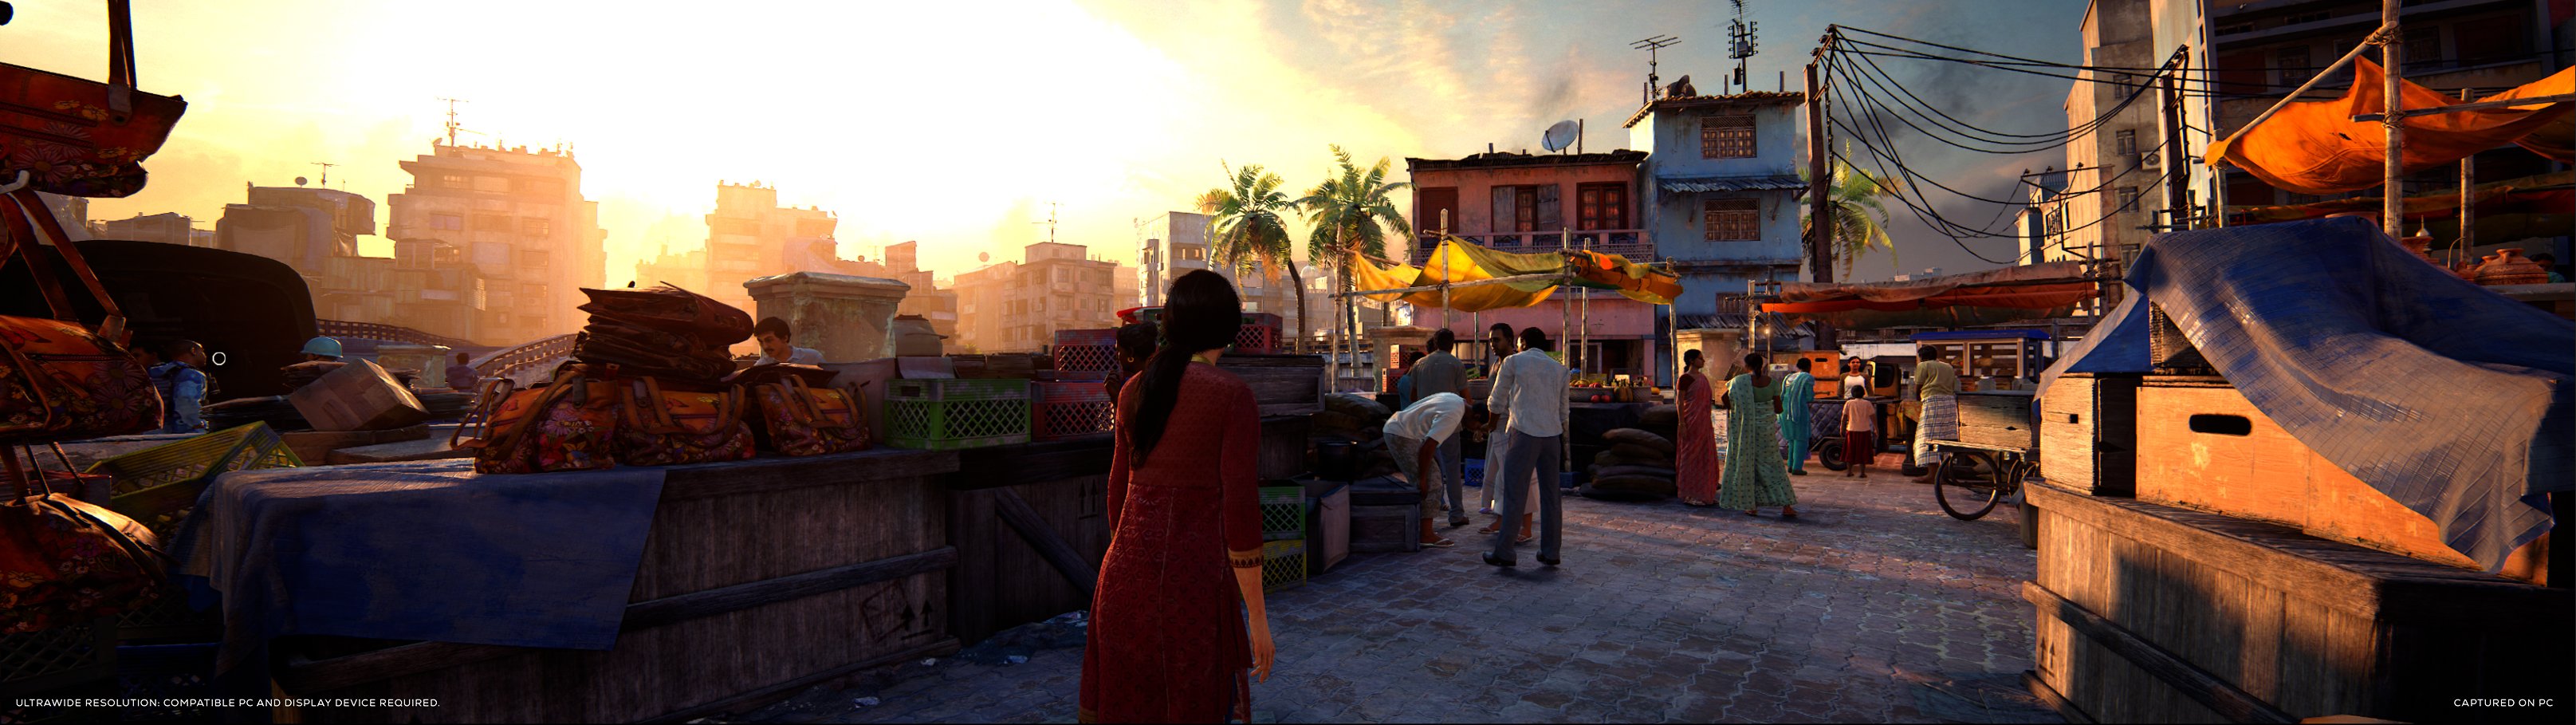 Uncharted: Legacy of Thieves' Collection: Glorious 21:9 Ultrawide